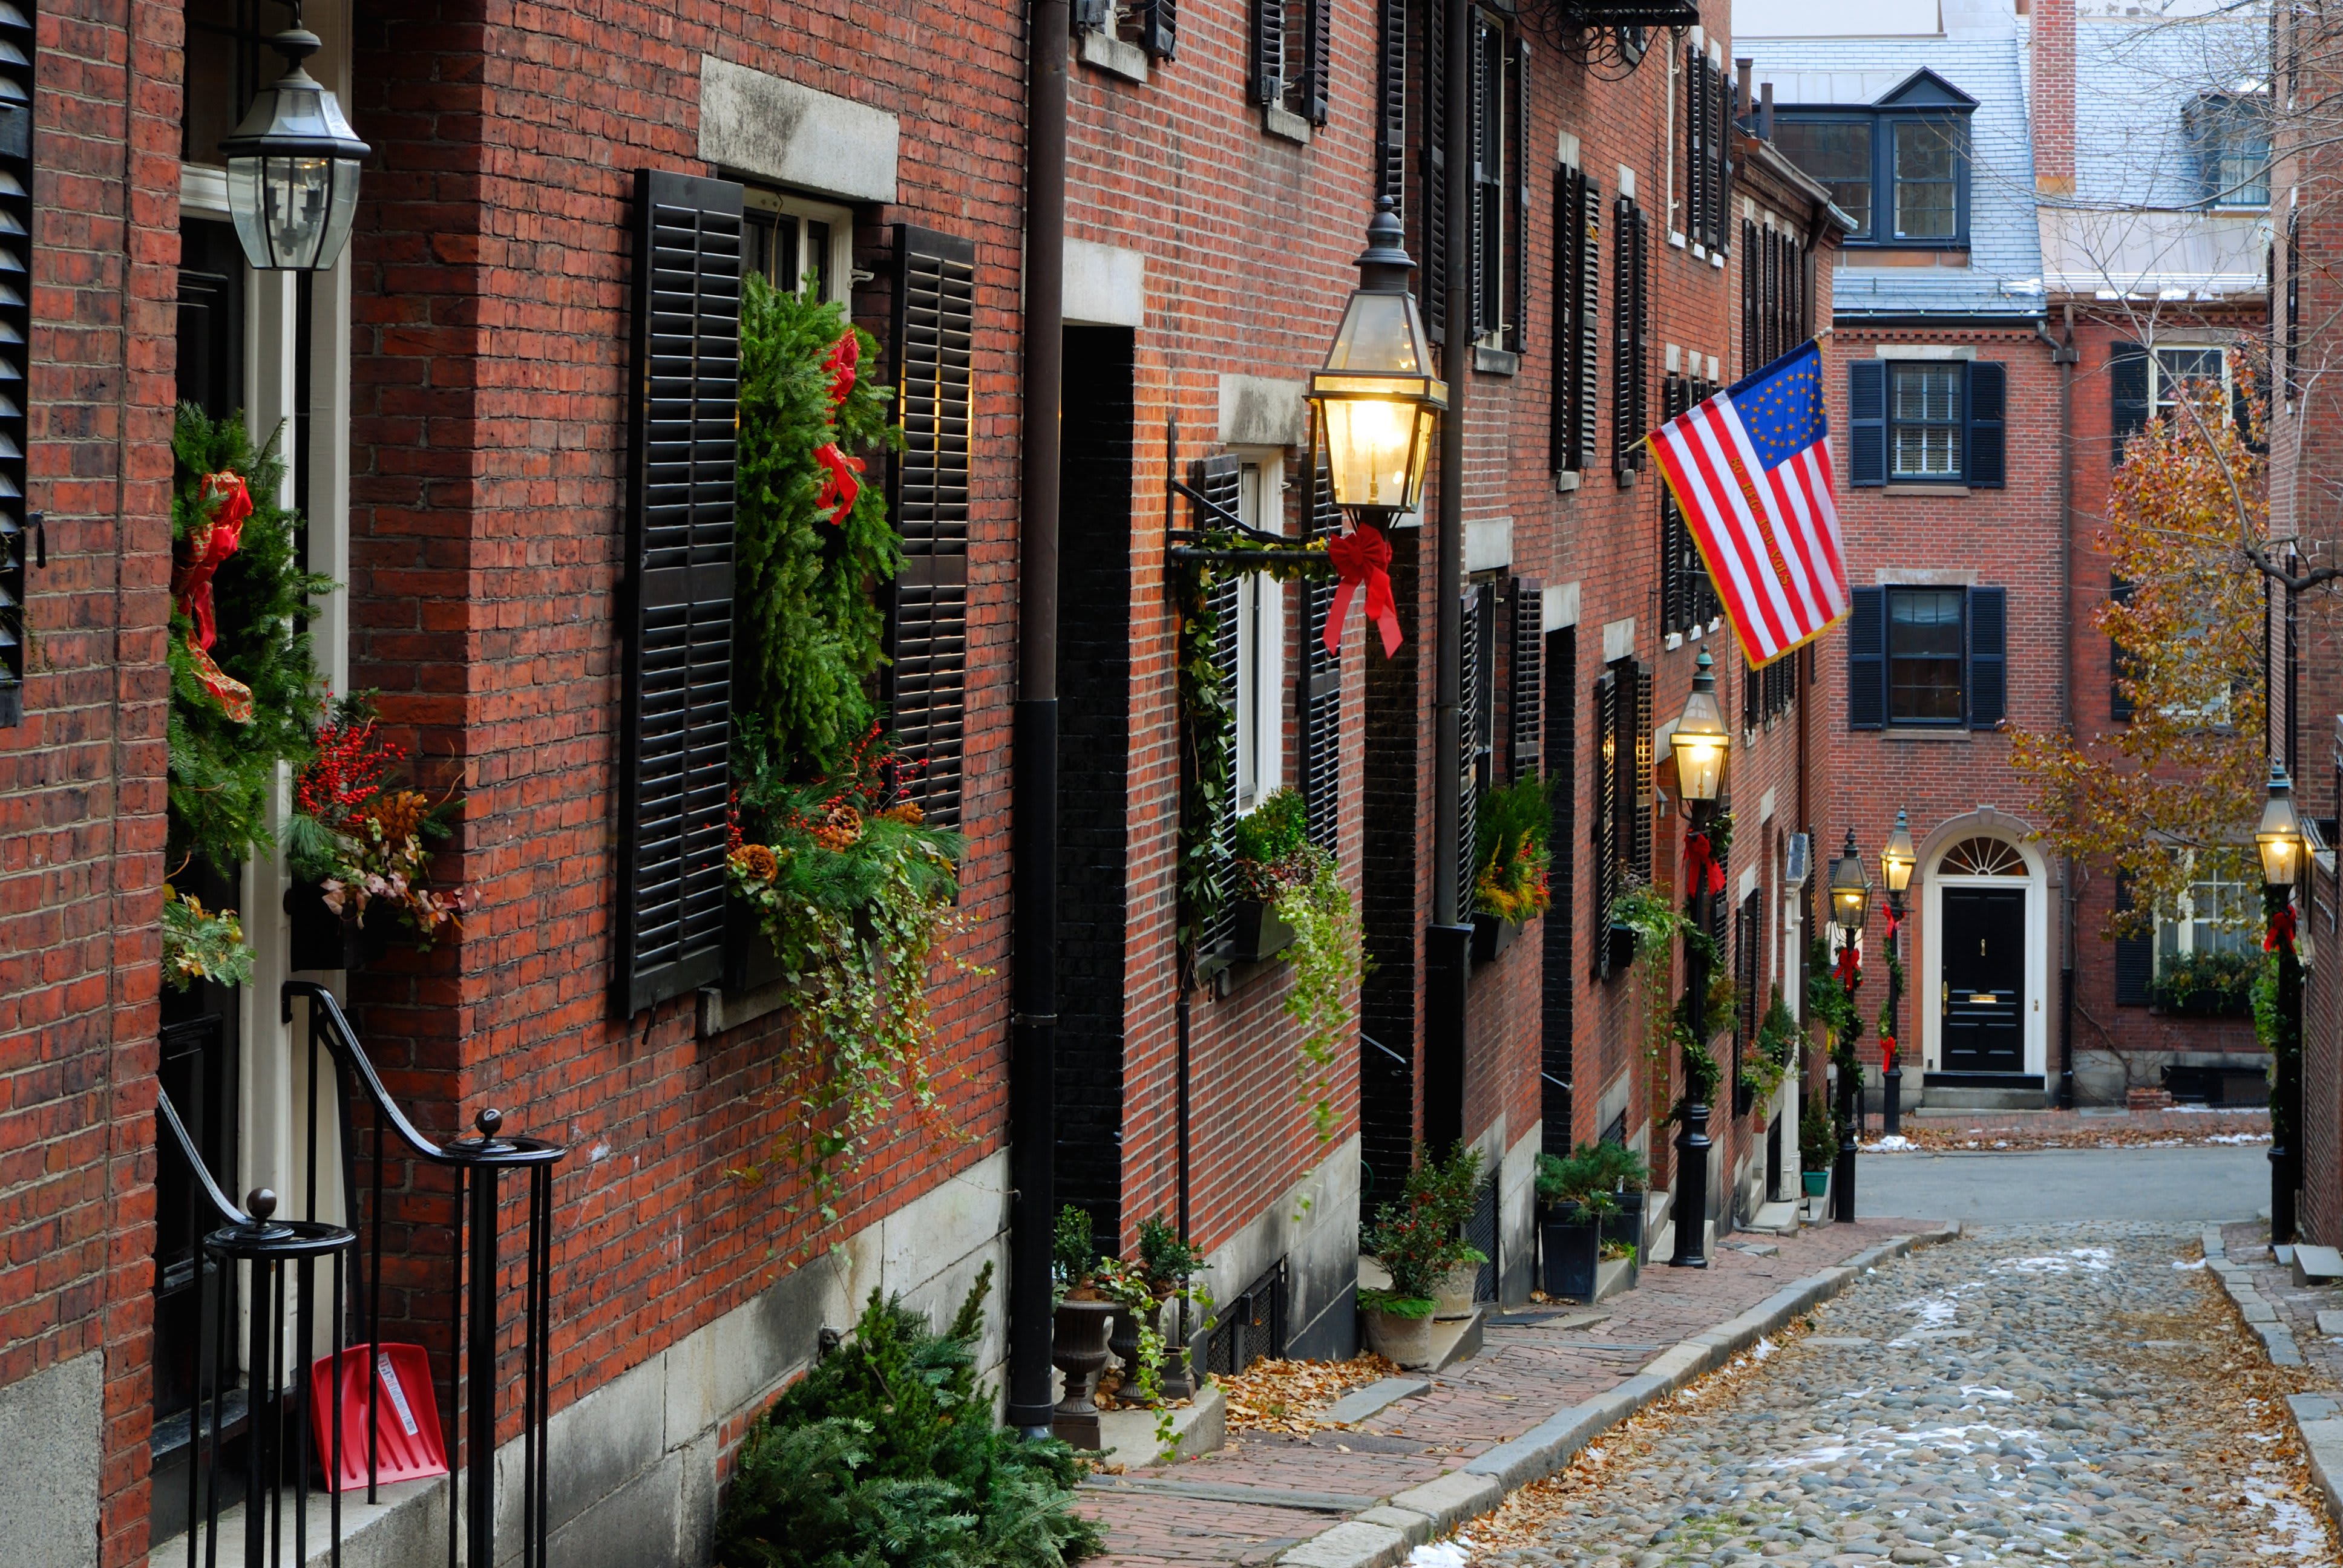 Image of City, Road, Street, Urban, Alley, Flag, Path, Plant, Brick, Neighborhood, Lamp, Potted Plant, 